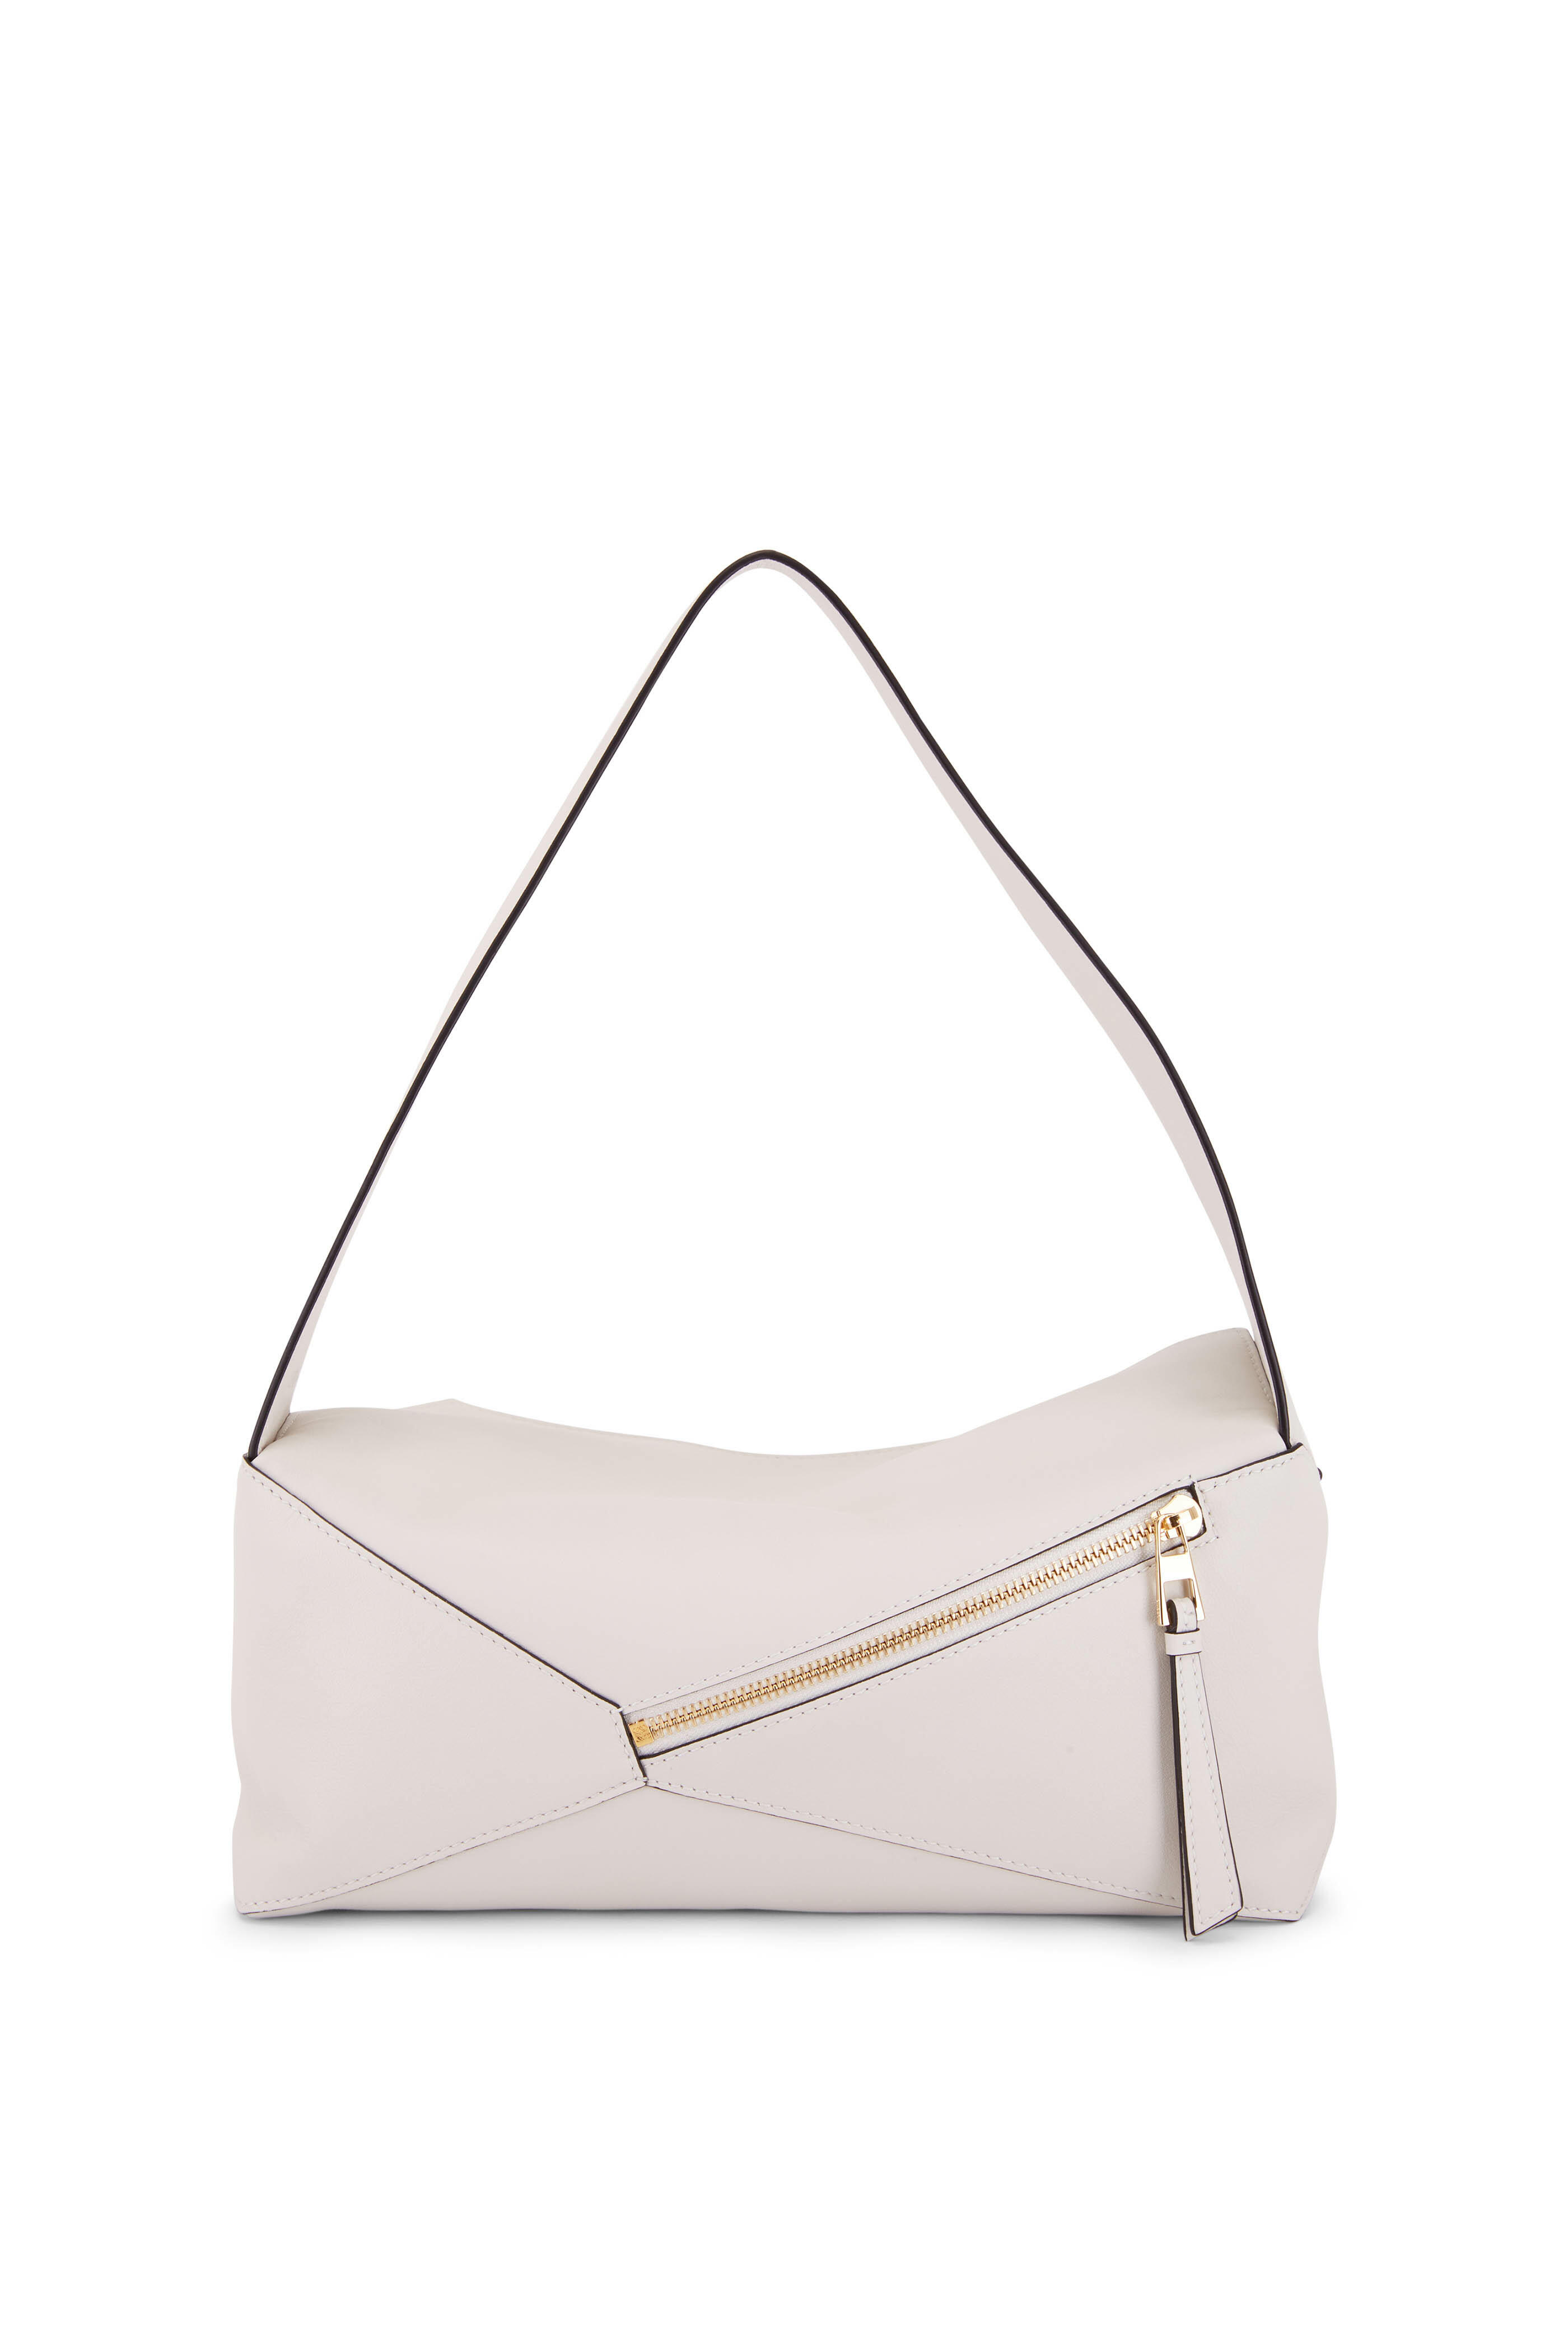 Loewe - Puzzle Soft White Leather Hobo Bag | Mitchell Stores